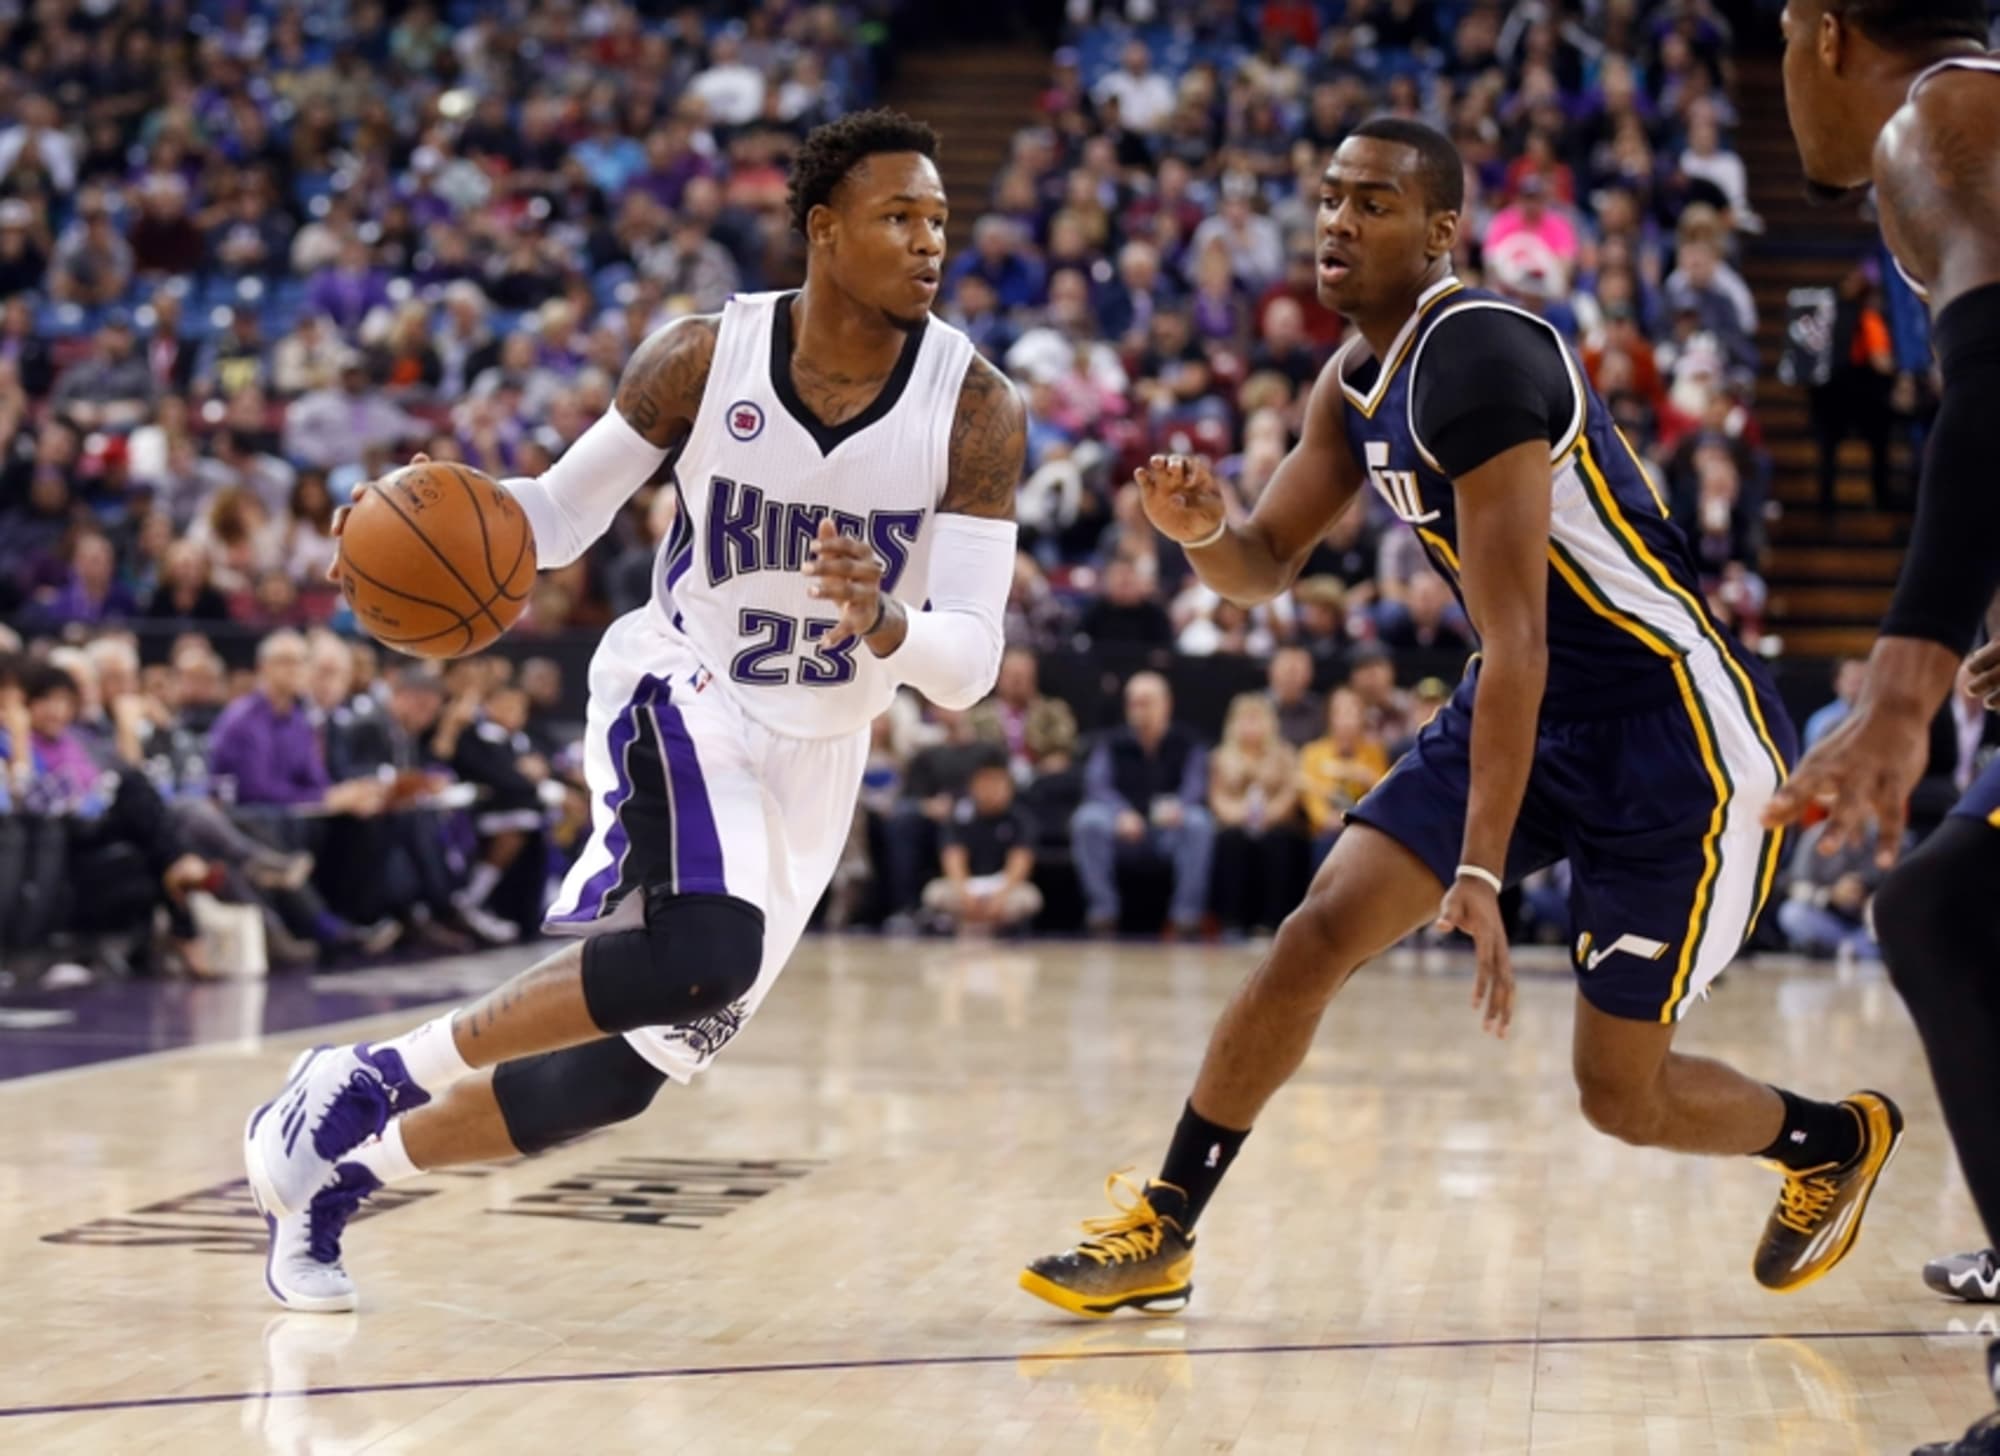 Suns 2013 NBA Draft Watch: Is Ben McLemore The Best Fit For